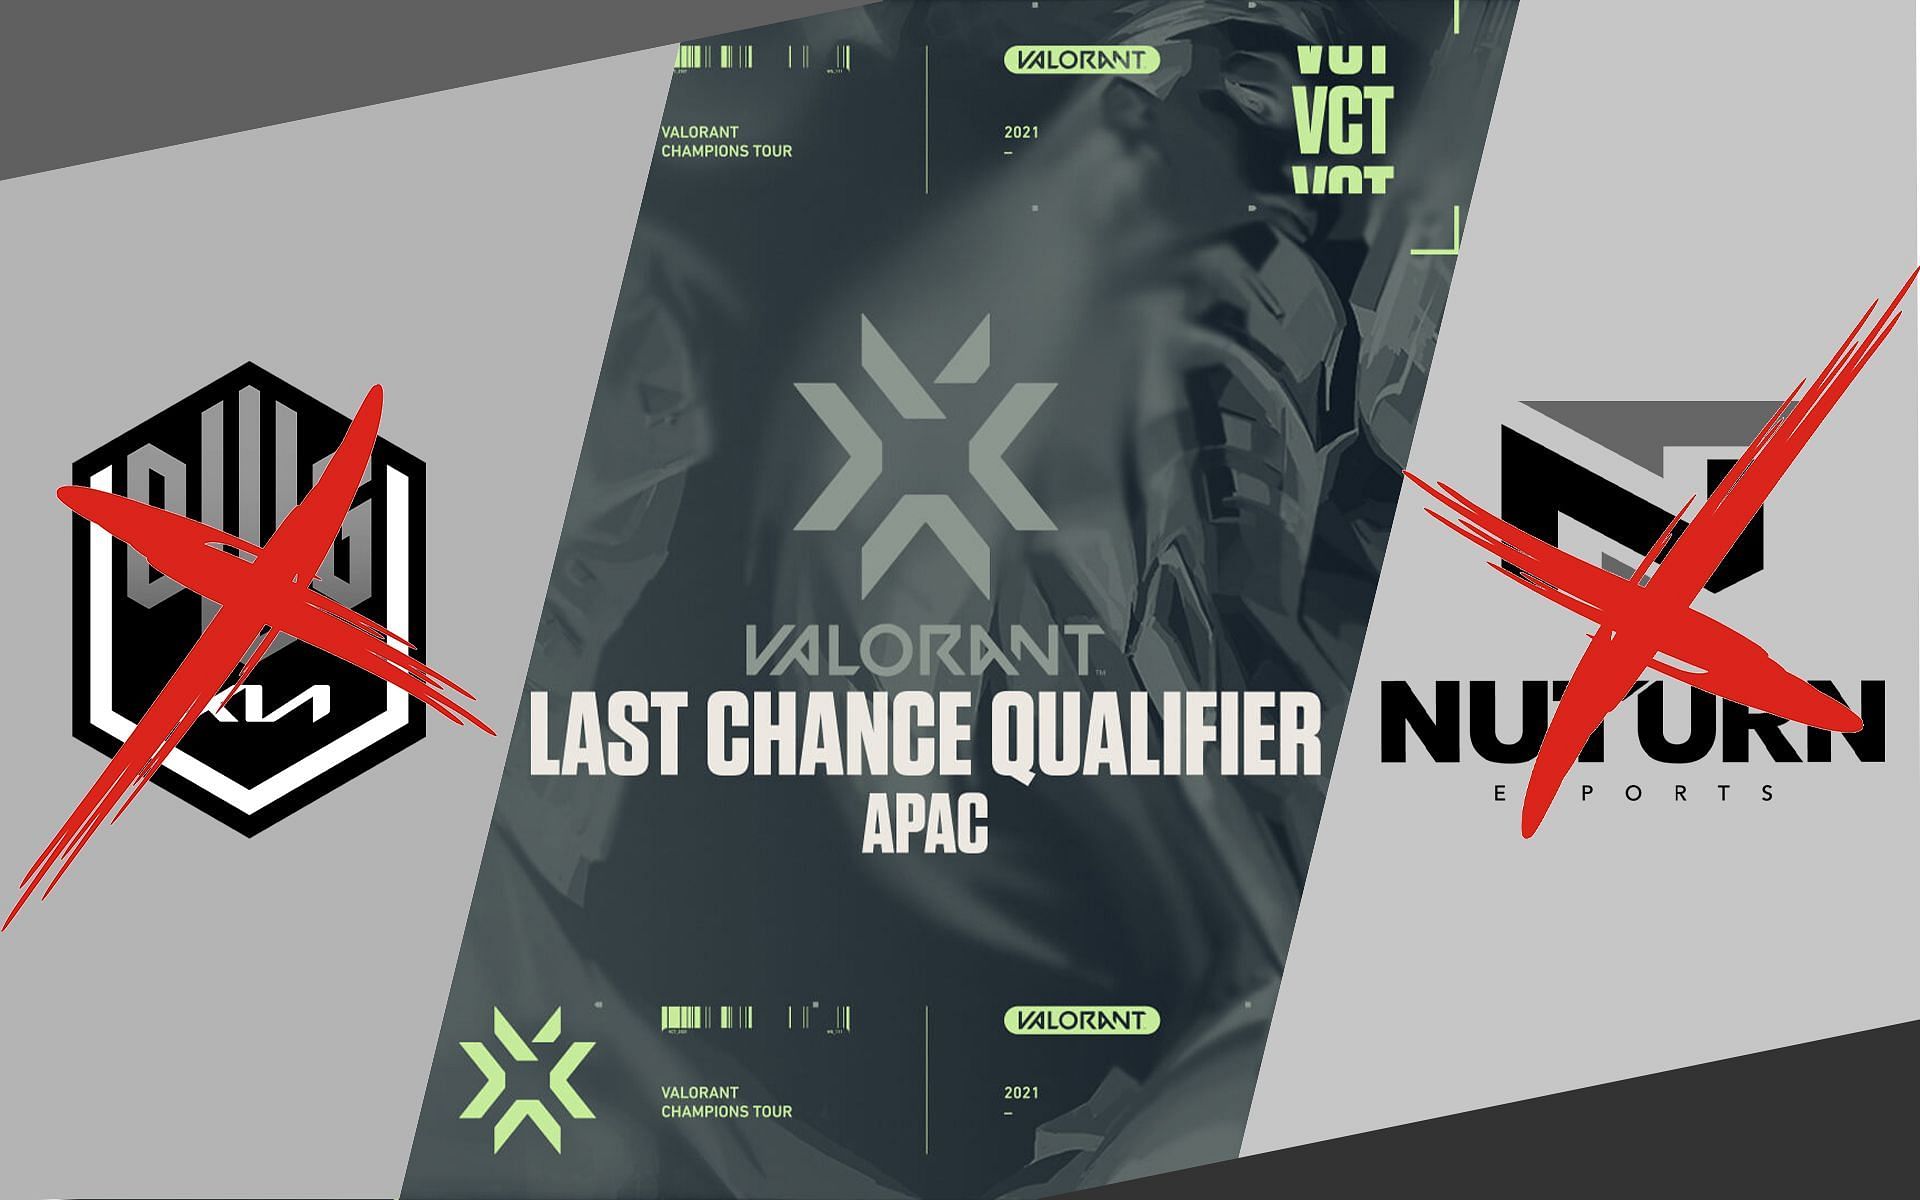 DAMWON Gaming and NUTURN Gaming have been eliminated from the Valorant Champions Tour APAC LCQ (Image by Sportskeeda)